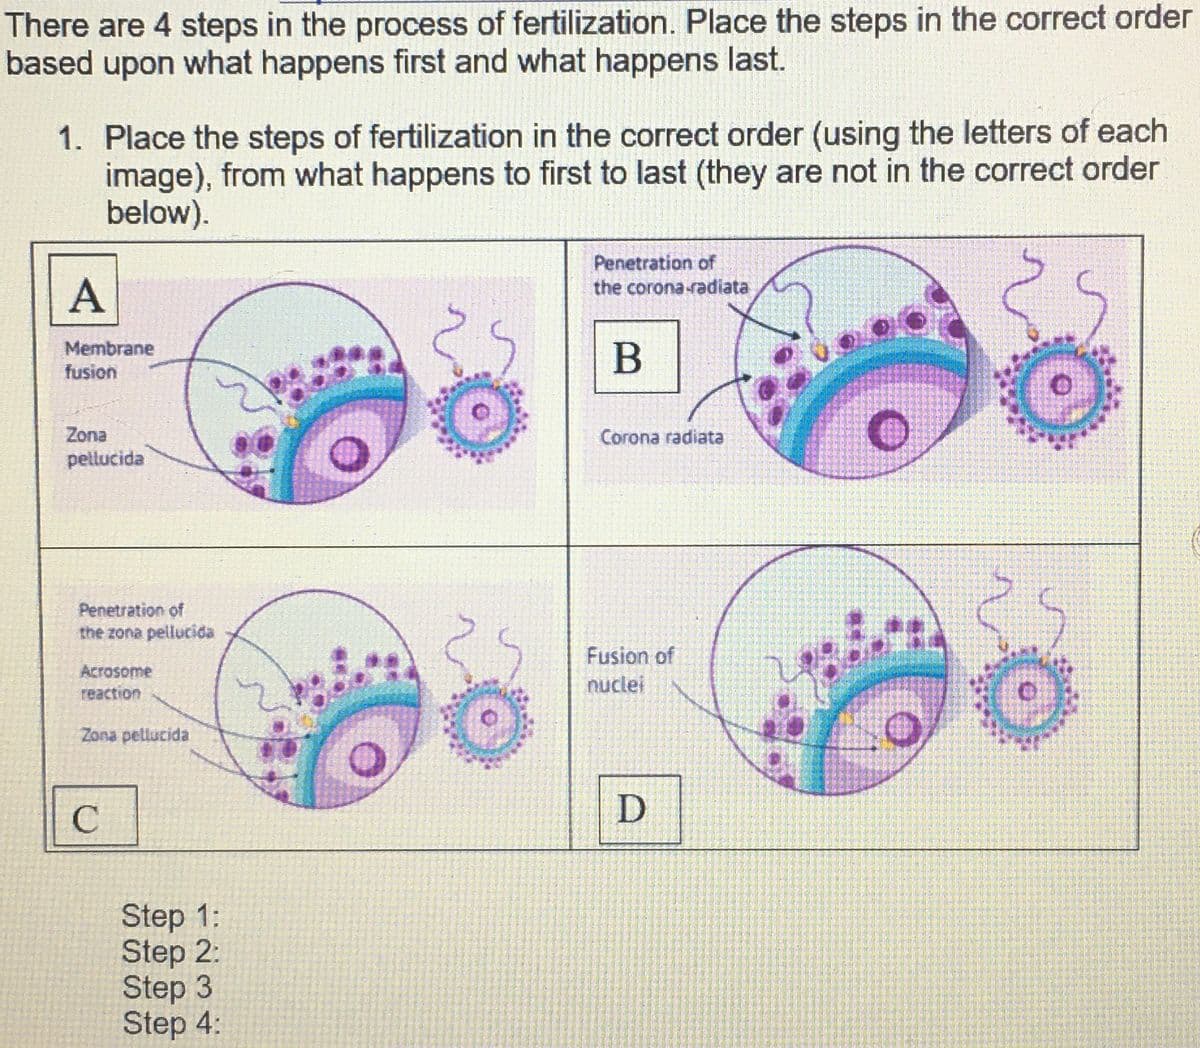 There are 4 steps in the process of fertilization. Place the steps in the correct order
based upon what happens first and what happens last.
1. Place the steps of fertilization in the correct order (using the letters of each
image), from what happens to first to last (they are not in the correct order
below).
A
Membrane
fusion
Penetration of
the corona-radiata
B
Zona
pellucida
Corona radiata
Penetration of
the zona pellucida
Acrosome
reaction
Zona pellucida
Fusion of
nuclei
C
Step 1:
Step 2:
Step 3
Step 4:
D